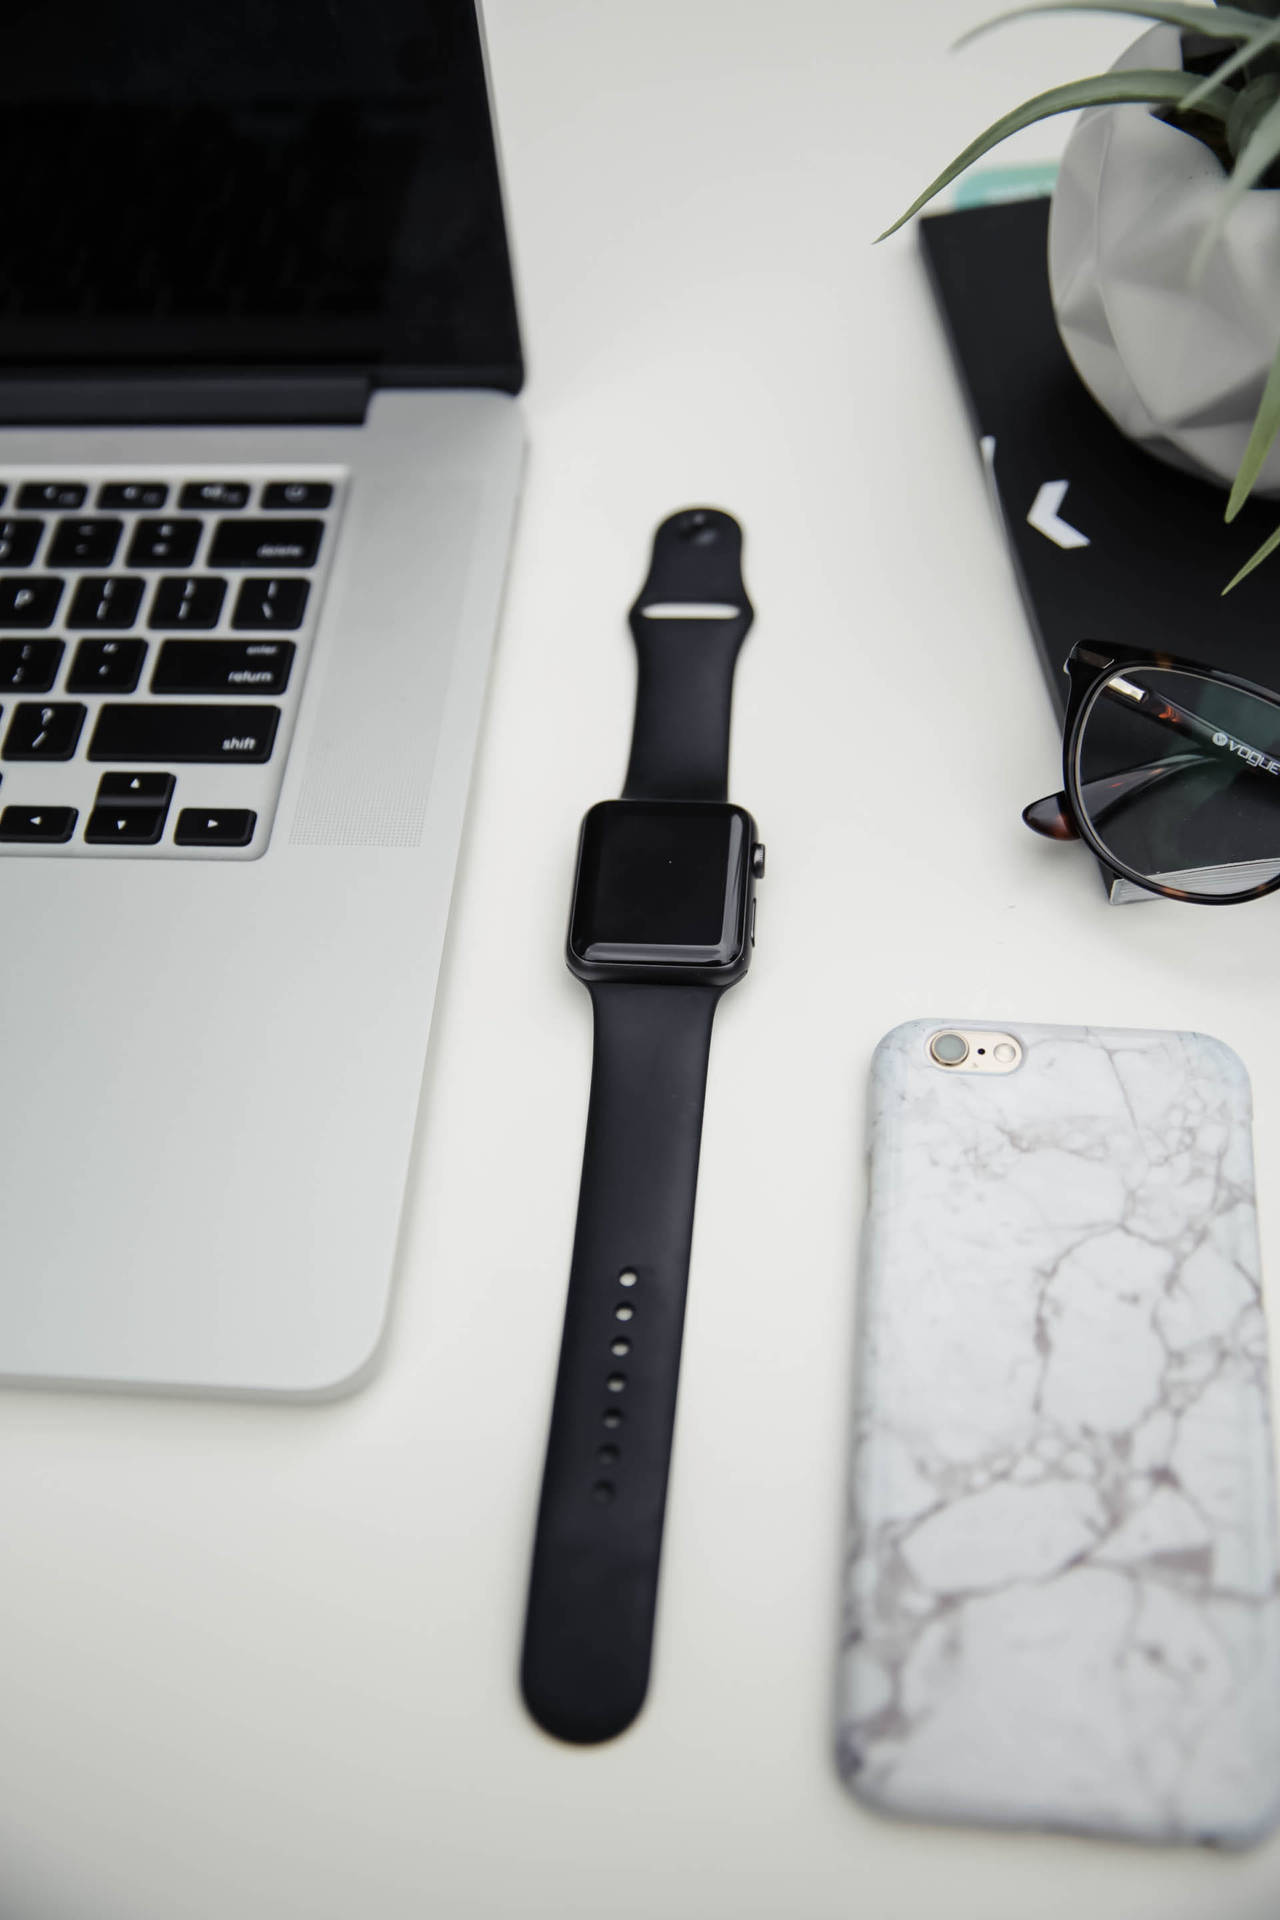 Iphone Desk With Smartwatch Picture